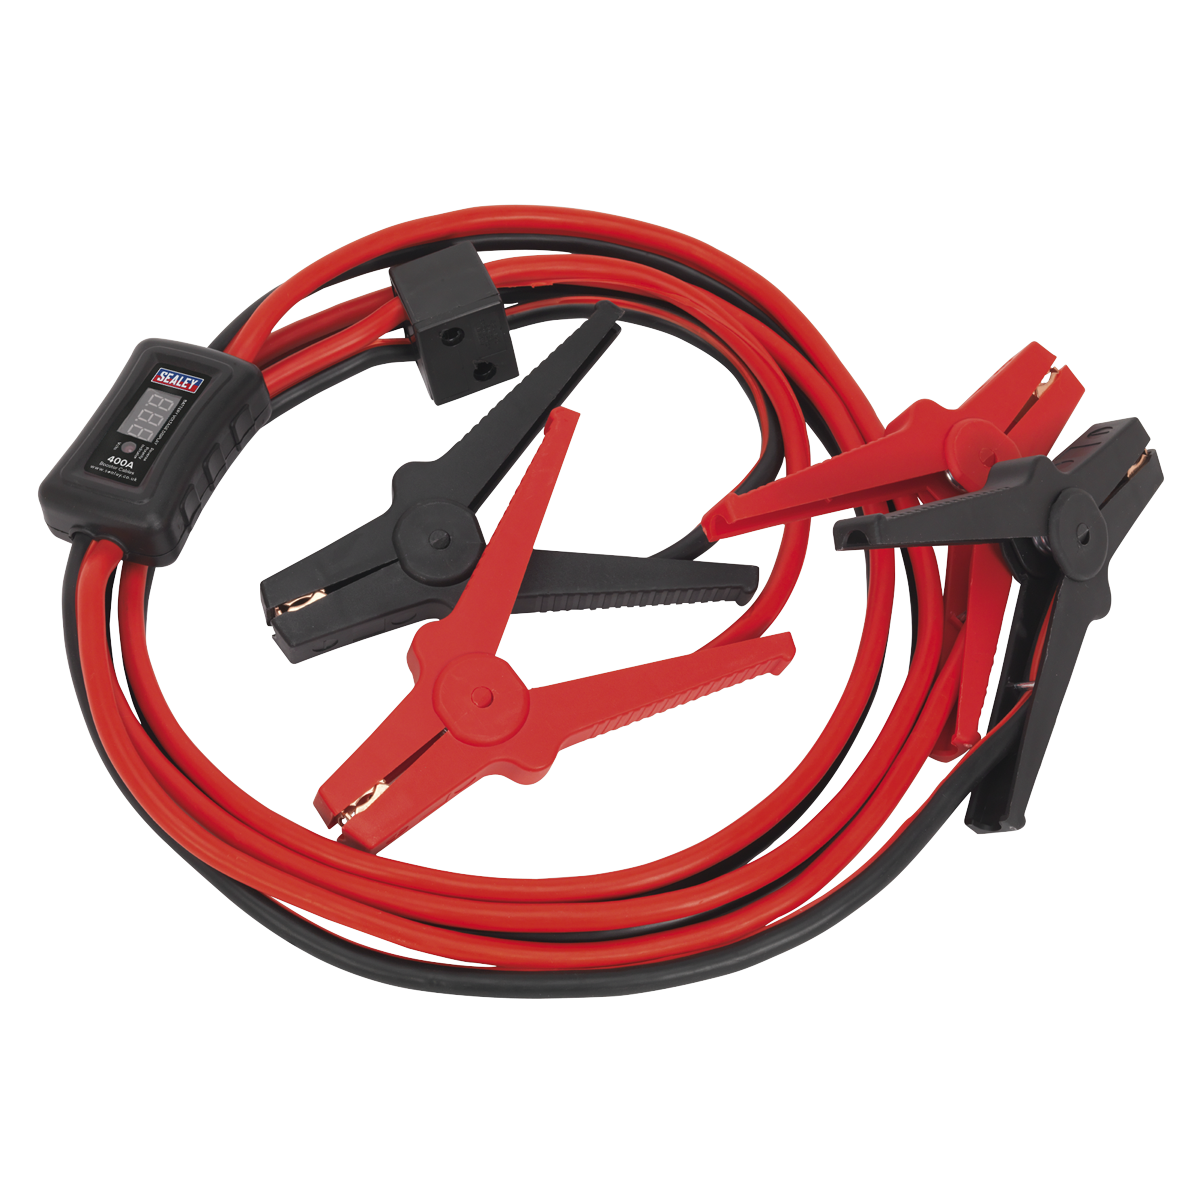 Booster Cables 16mm² x 3m 220A